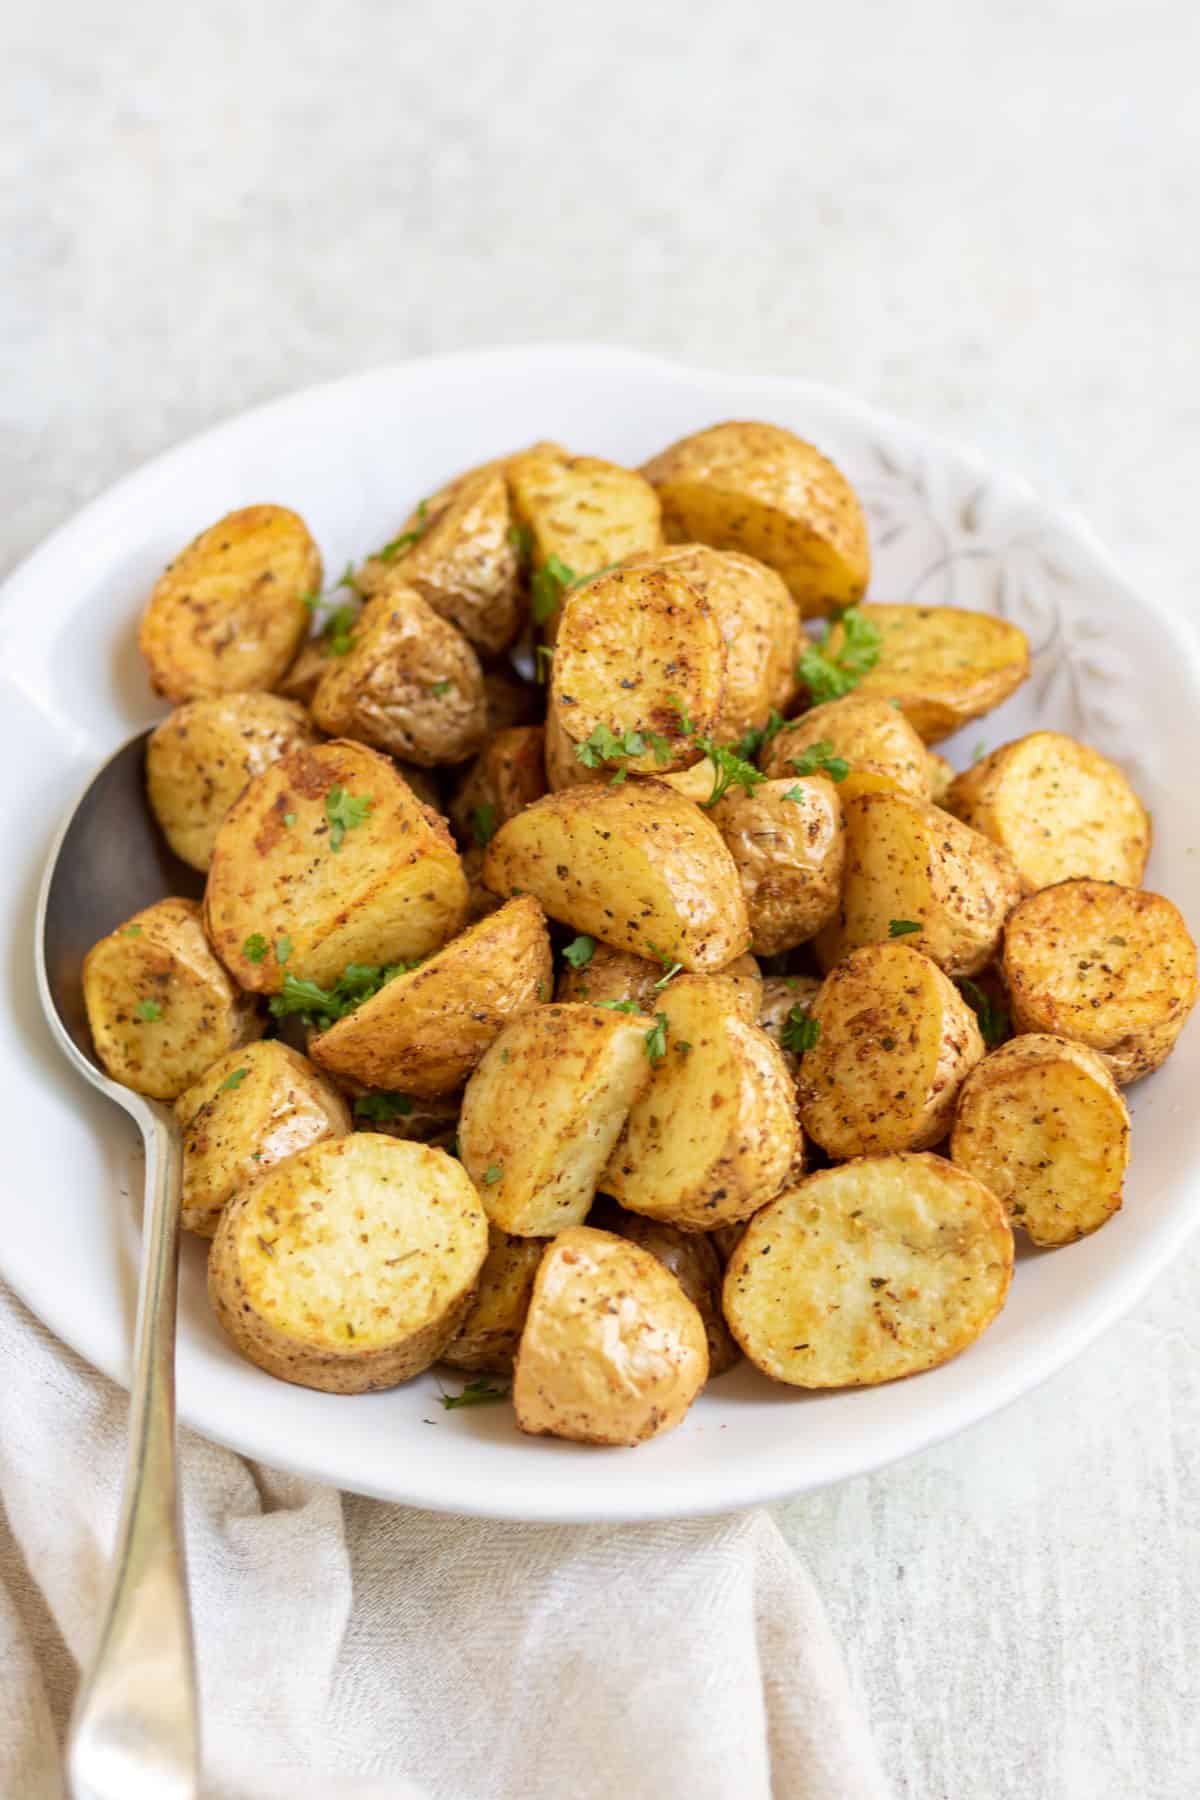 Bowl of air fryer potatoes on a table with a napkin.